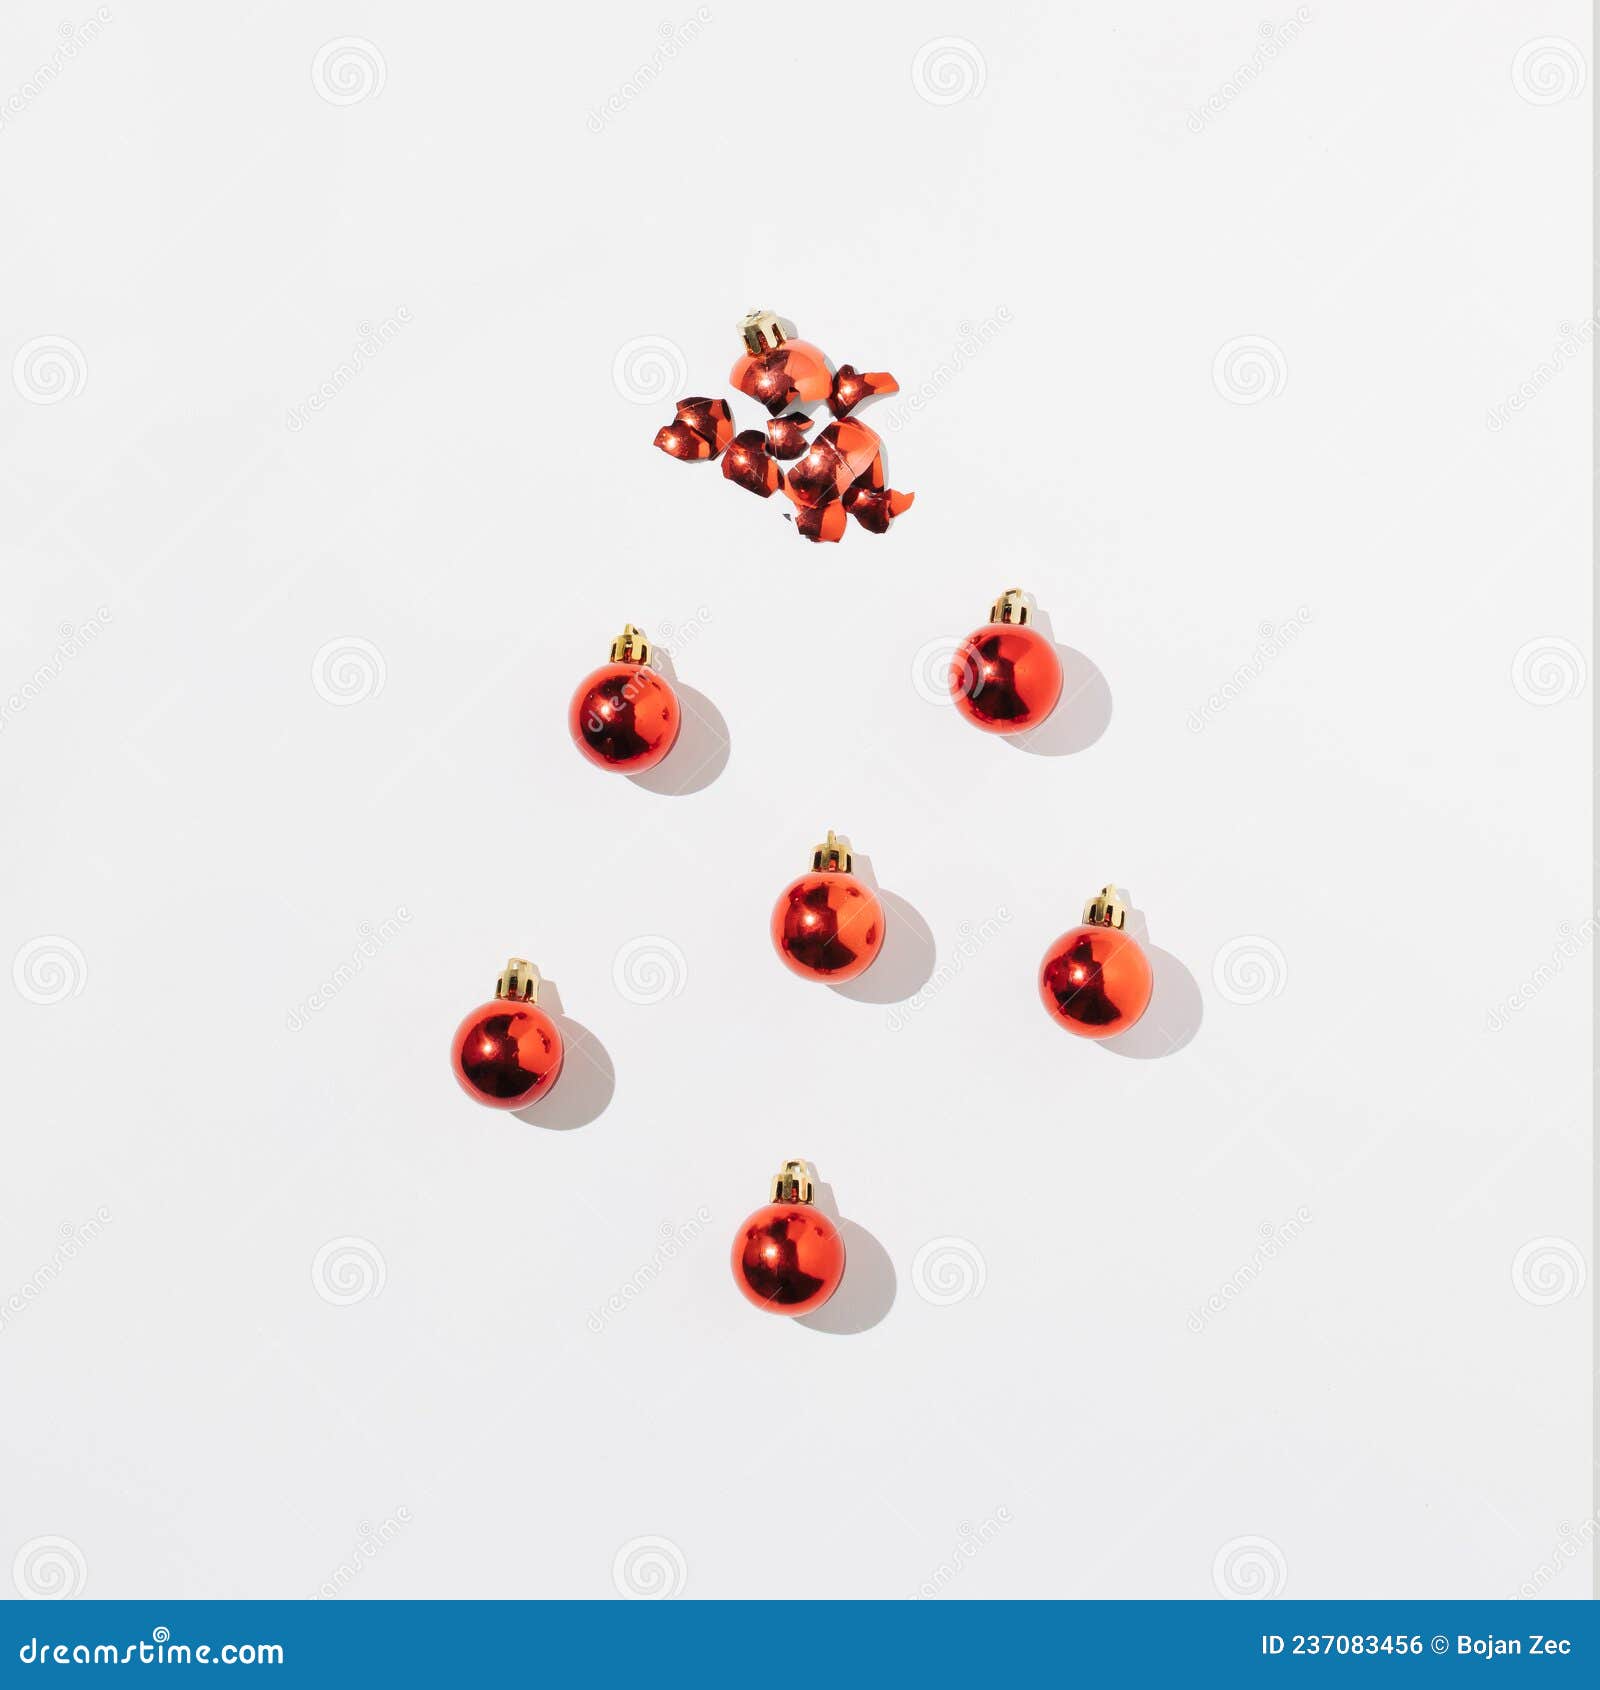 red decoracion balls with shadow on white background. top view. flat lay